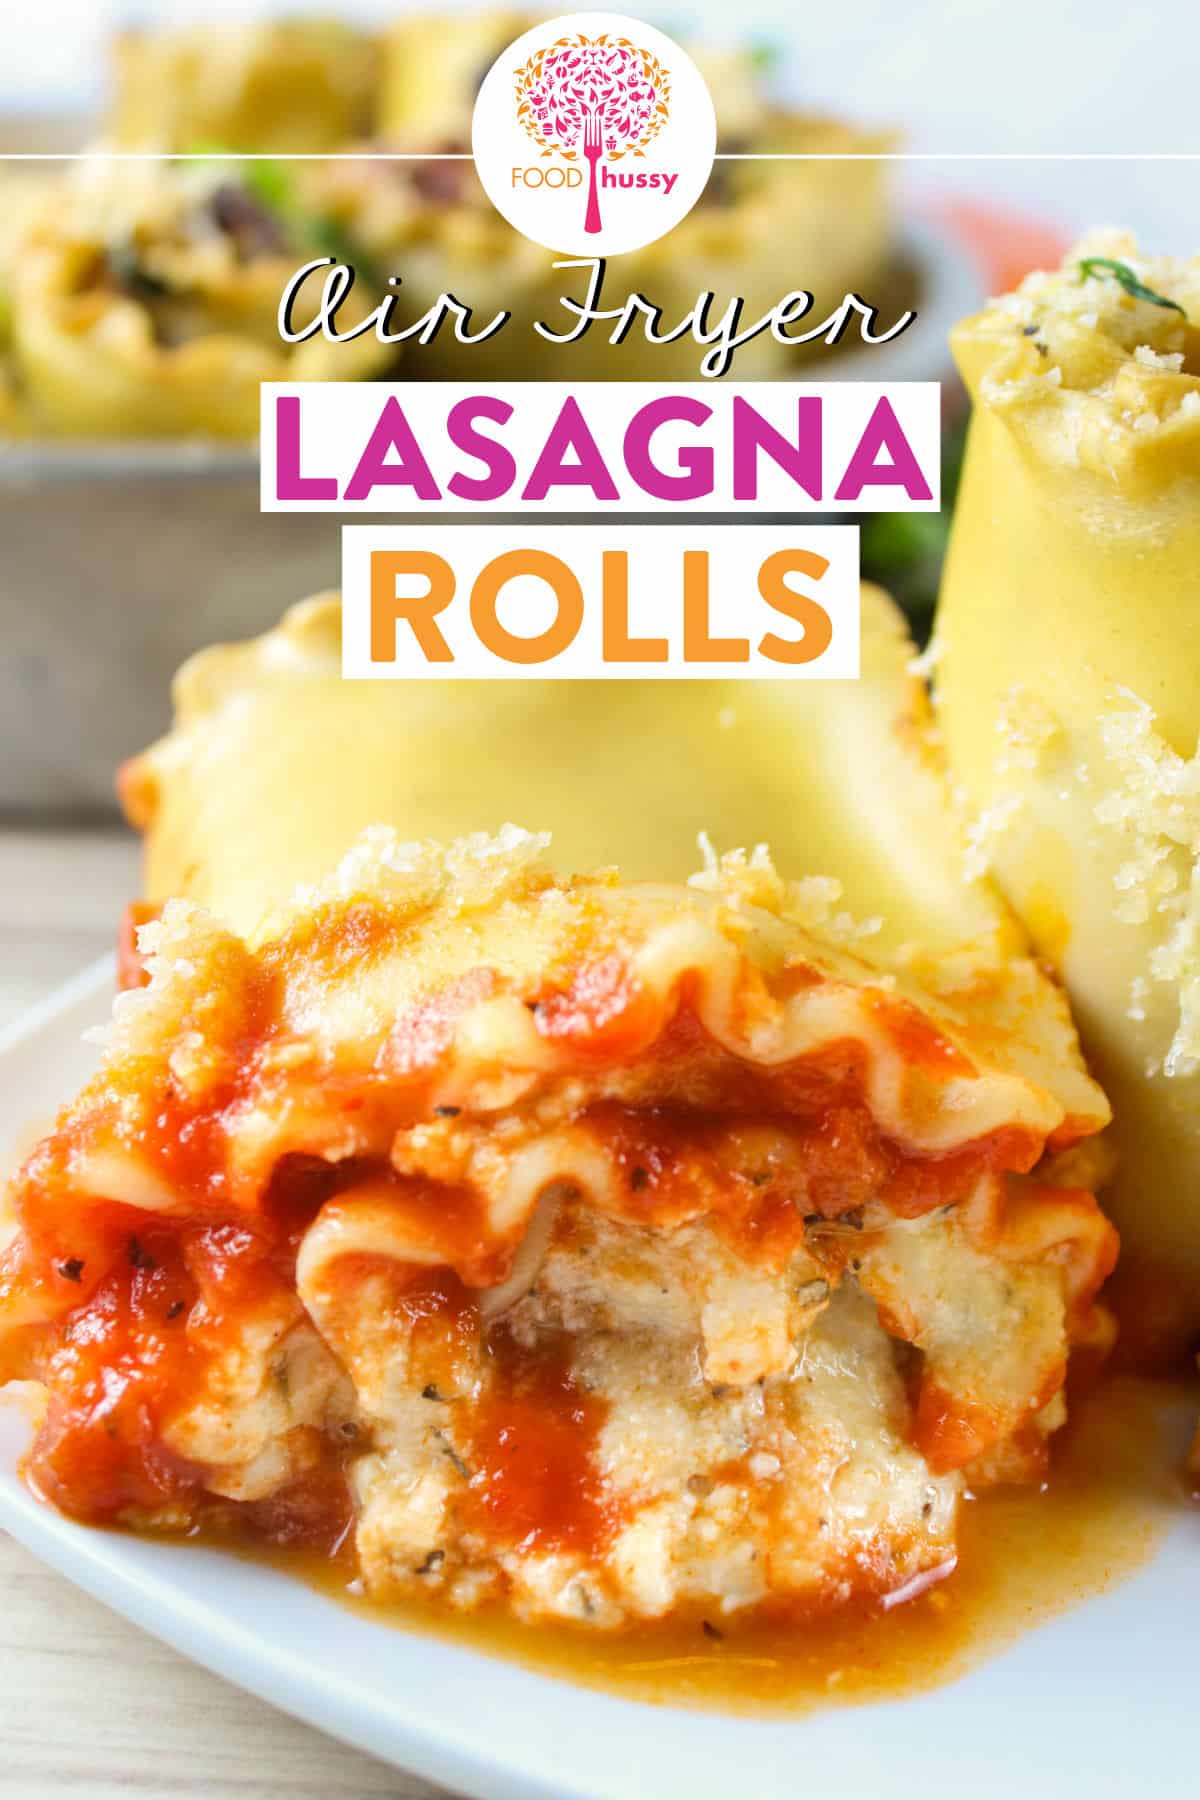 Air Fryer Lasagna Rolls is a delicious way to have cheesy, comforting, saucy lasagna in less than 30 minutes! Full of sausage, mushrooms and cheese - lasagna rolls are an easy weeknight meal!  via @foodhussy